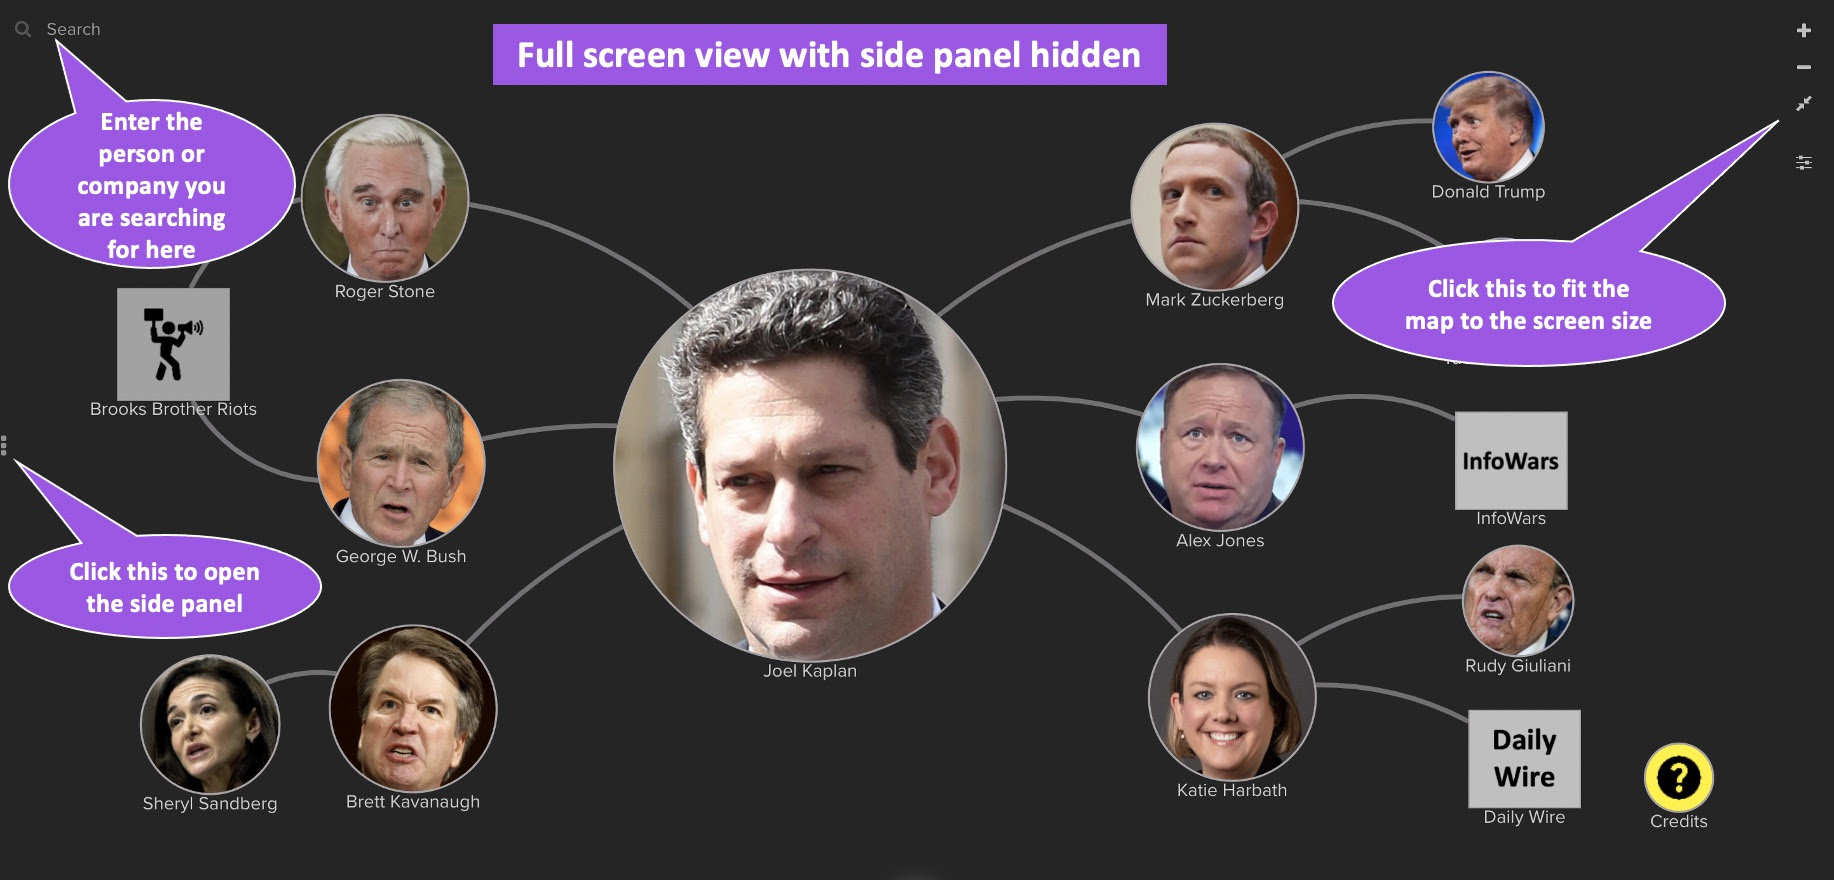 Use the Joel Kaplan relationship map to see his connections with people, groups and events.